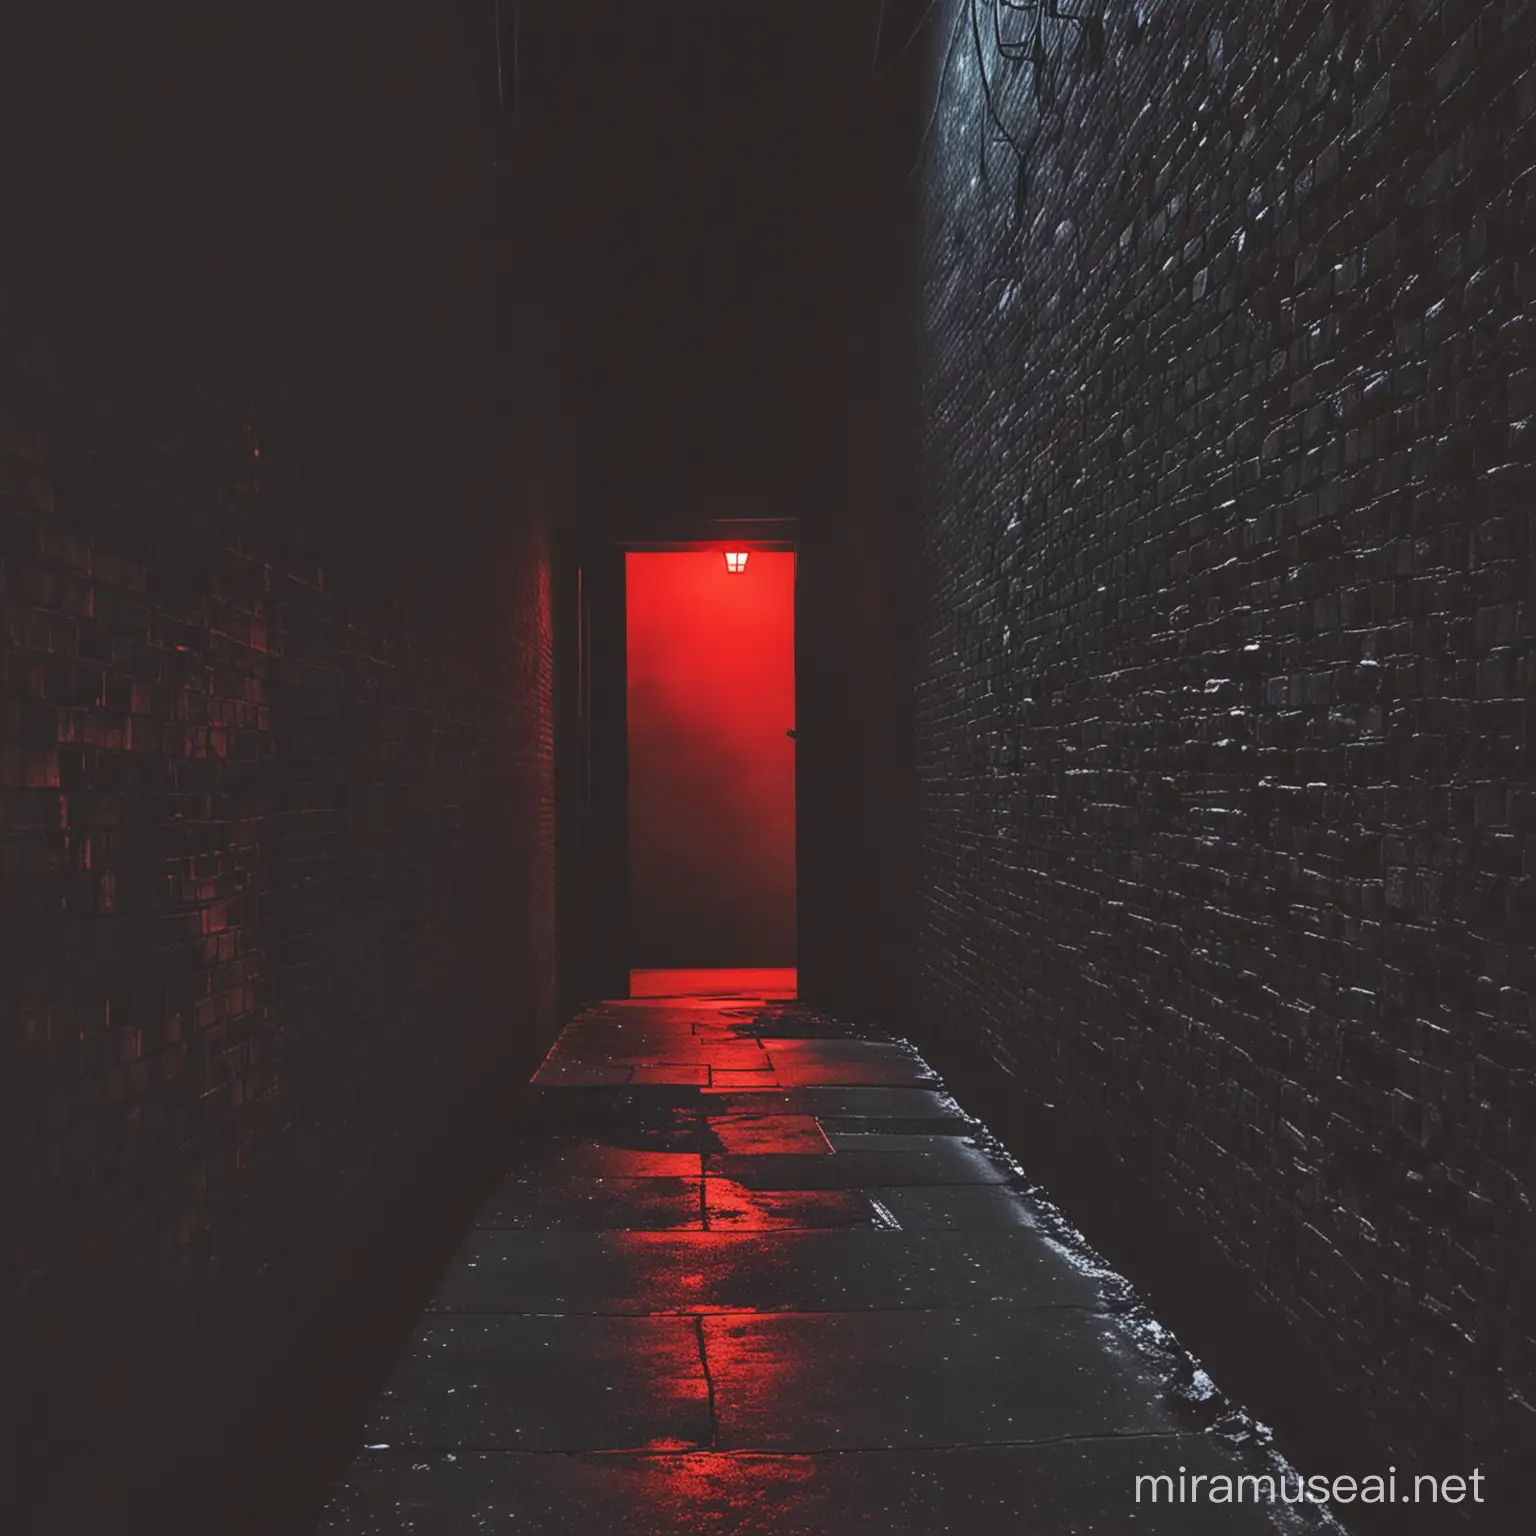 can you please make me a photo of a window at the end of a dark alley with glowing red light coming out of it?
